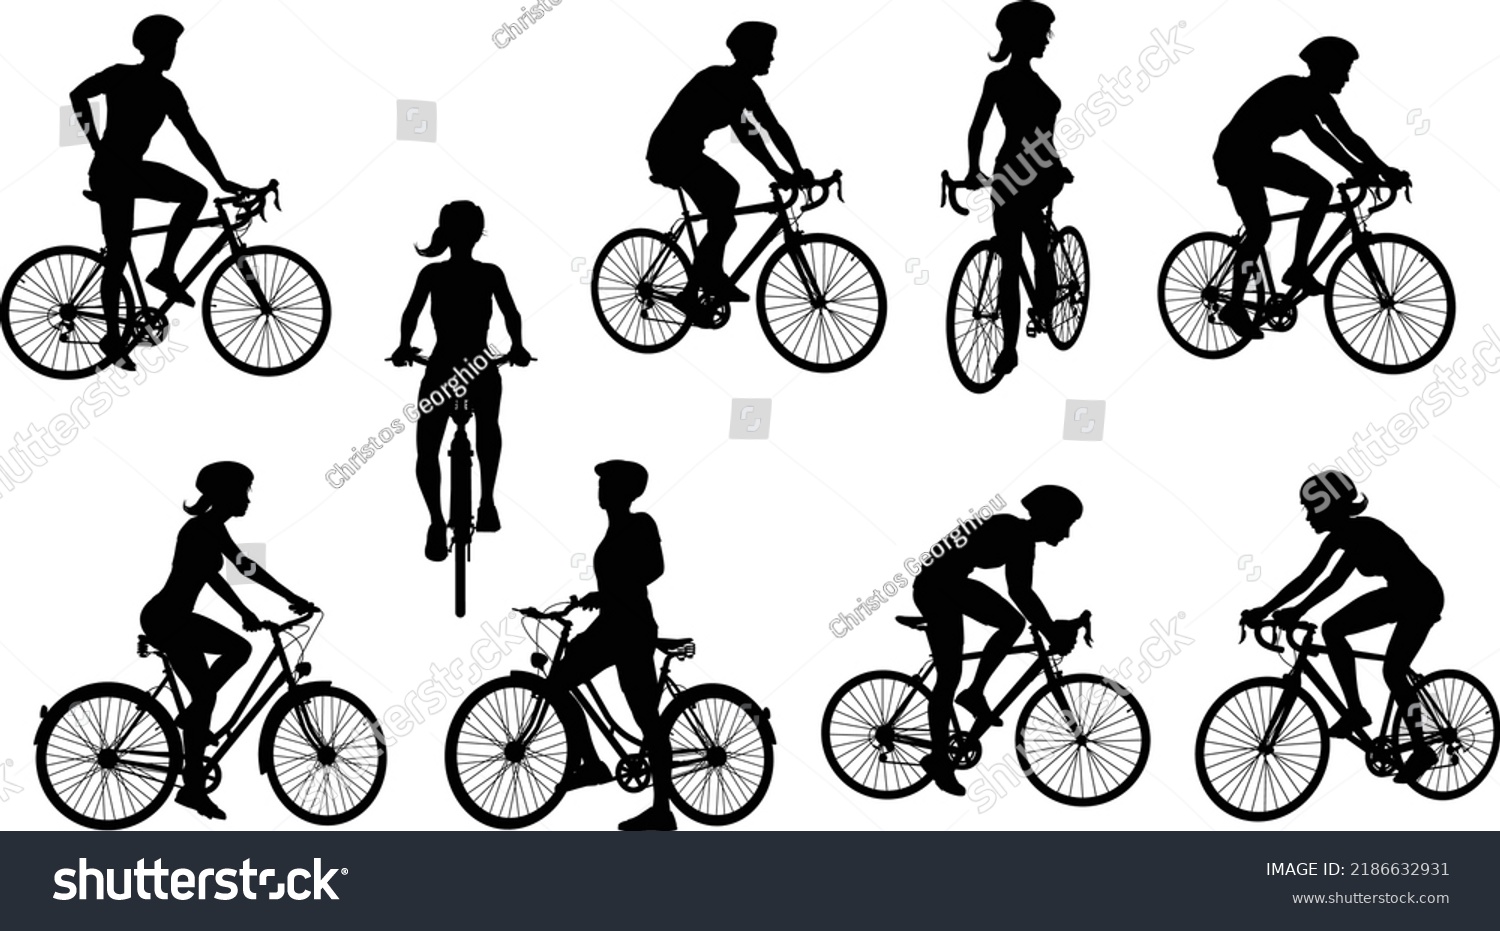 A set of bicyclists riding bikes and wearing a safety helmet in silhouette #2186632931